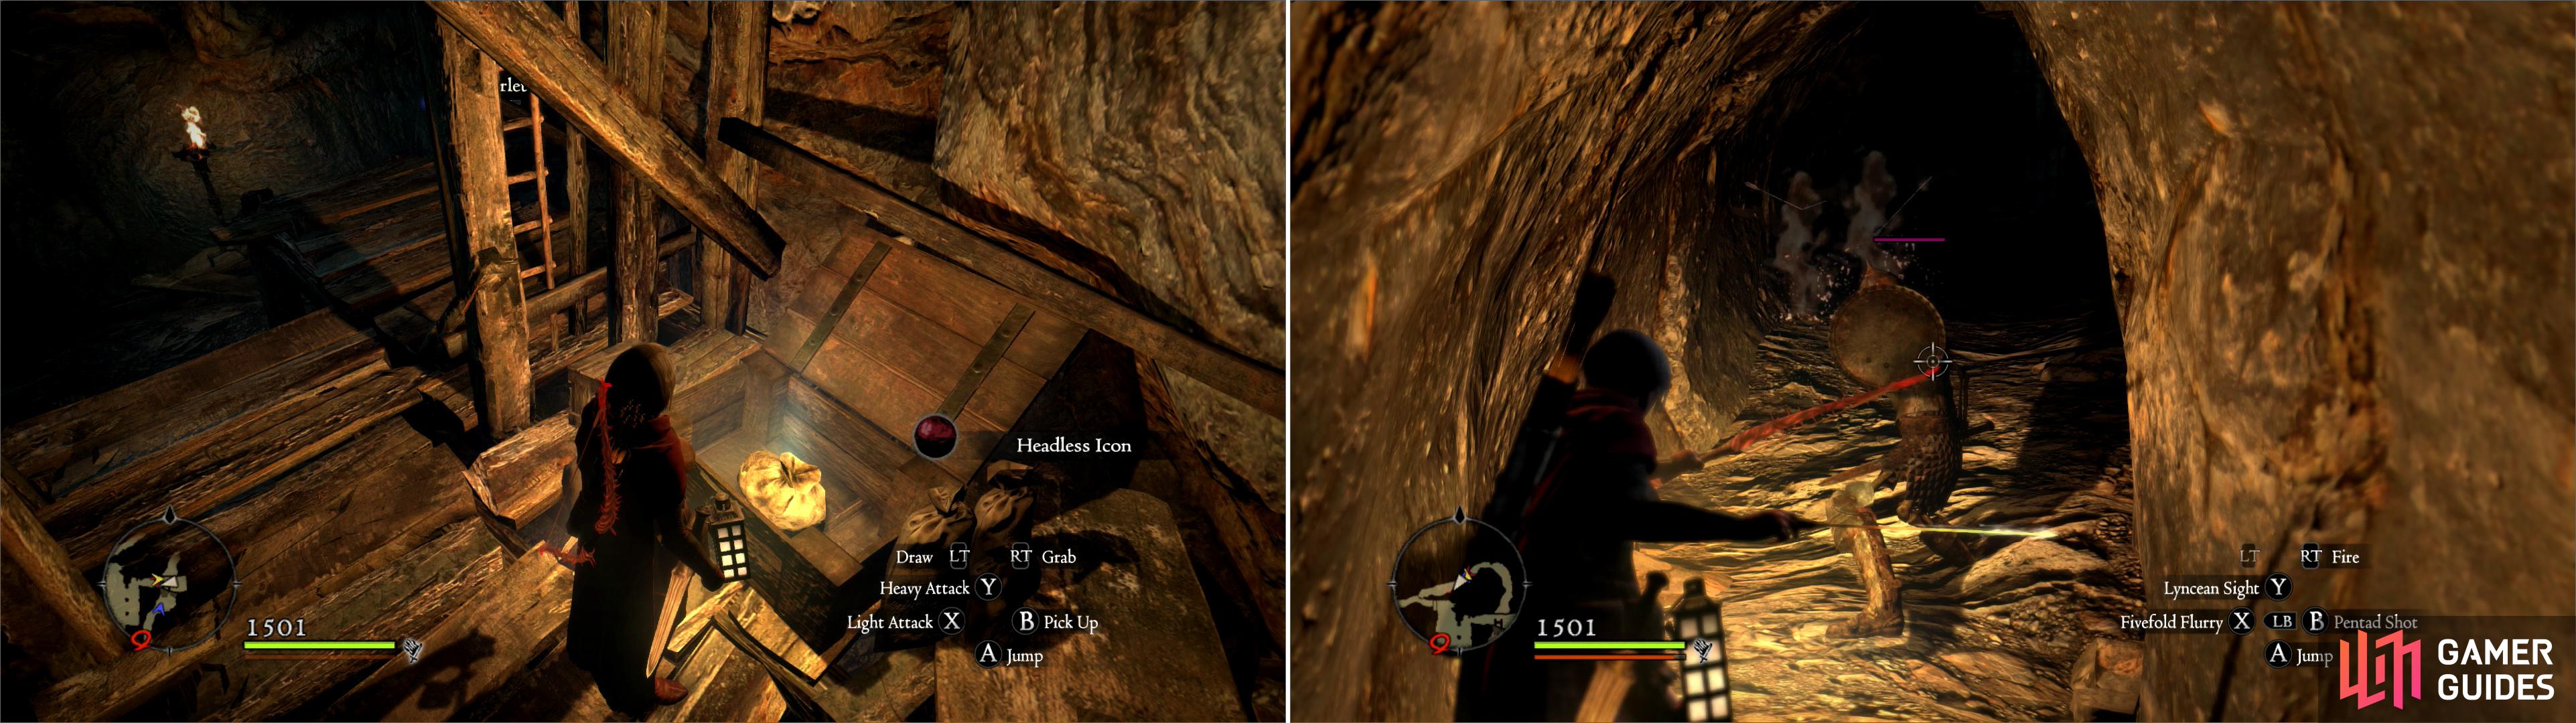 Search a chest under a wooden platform to find a Headless Icon, another rare component (left). Skeleton Knights guard a passage, at the end of which you’ll find some treasure (right).